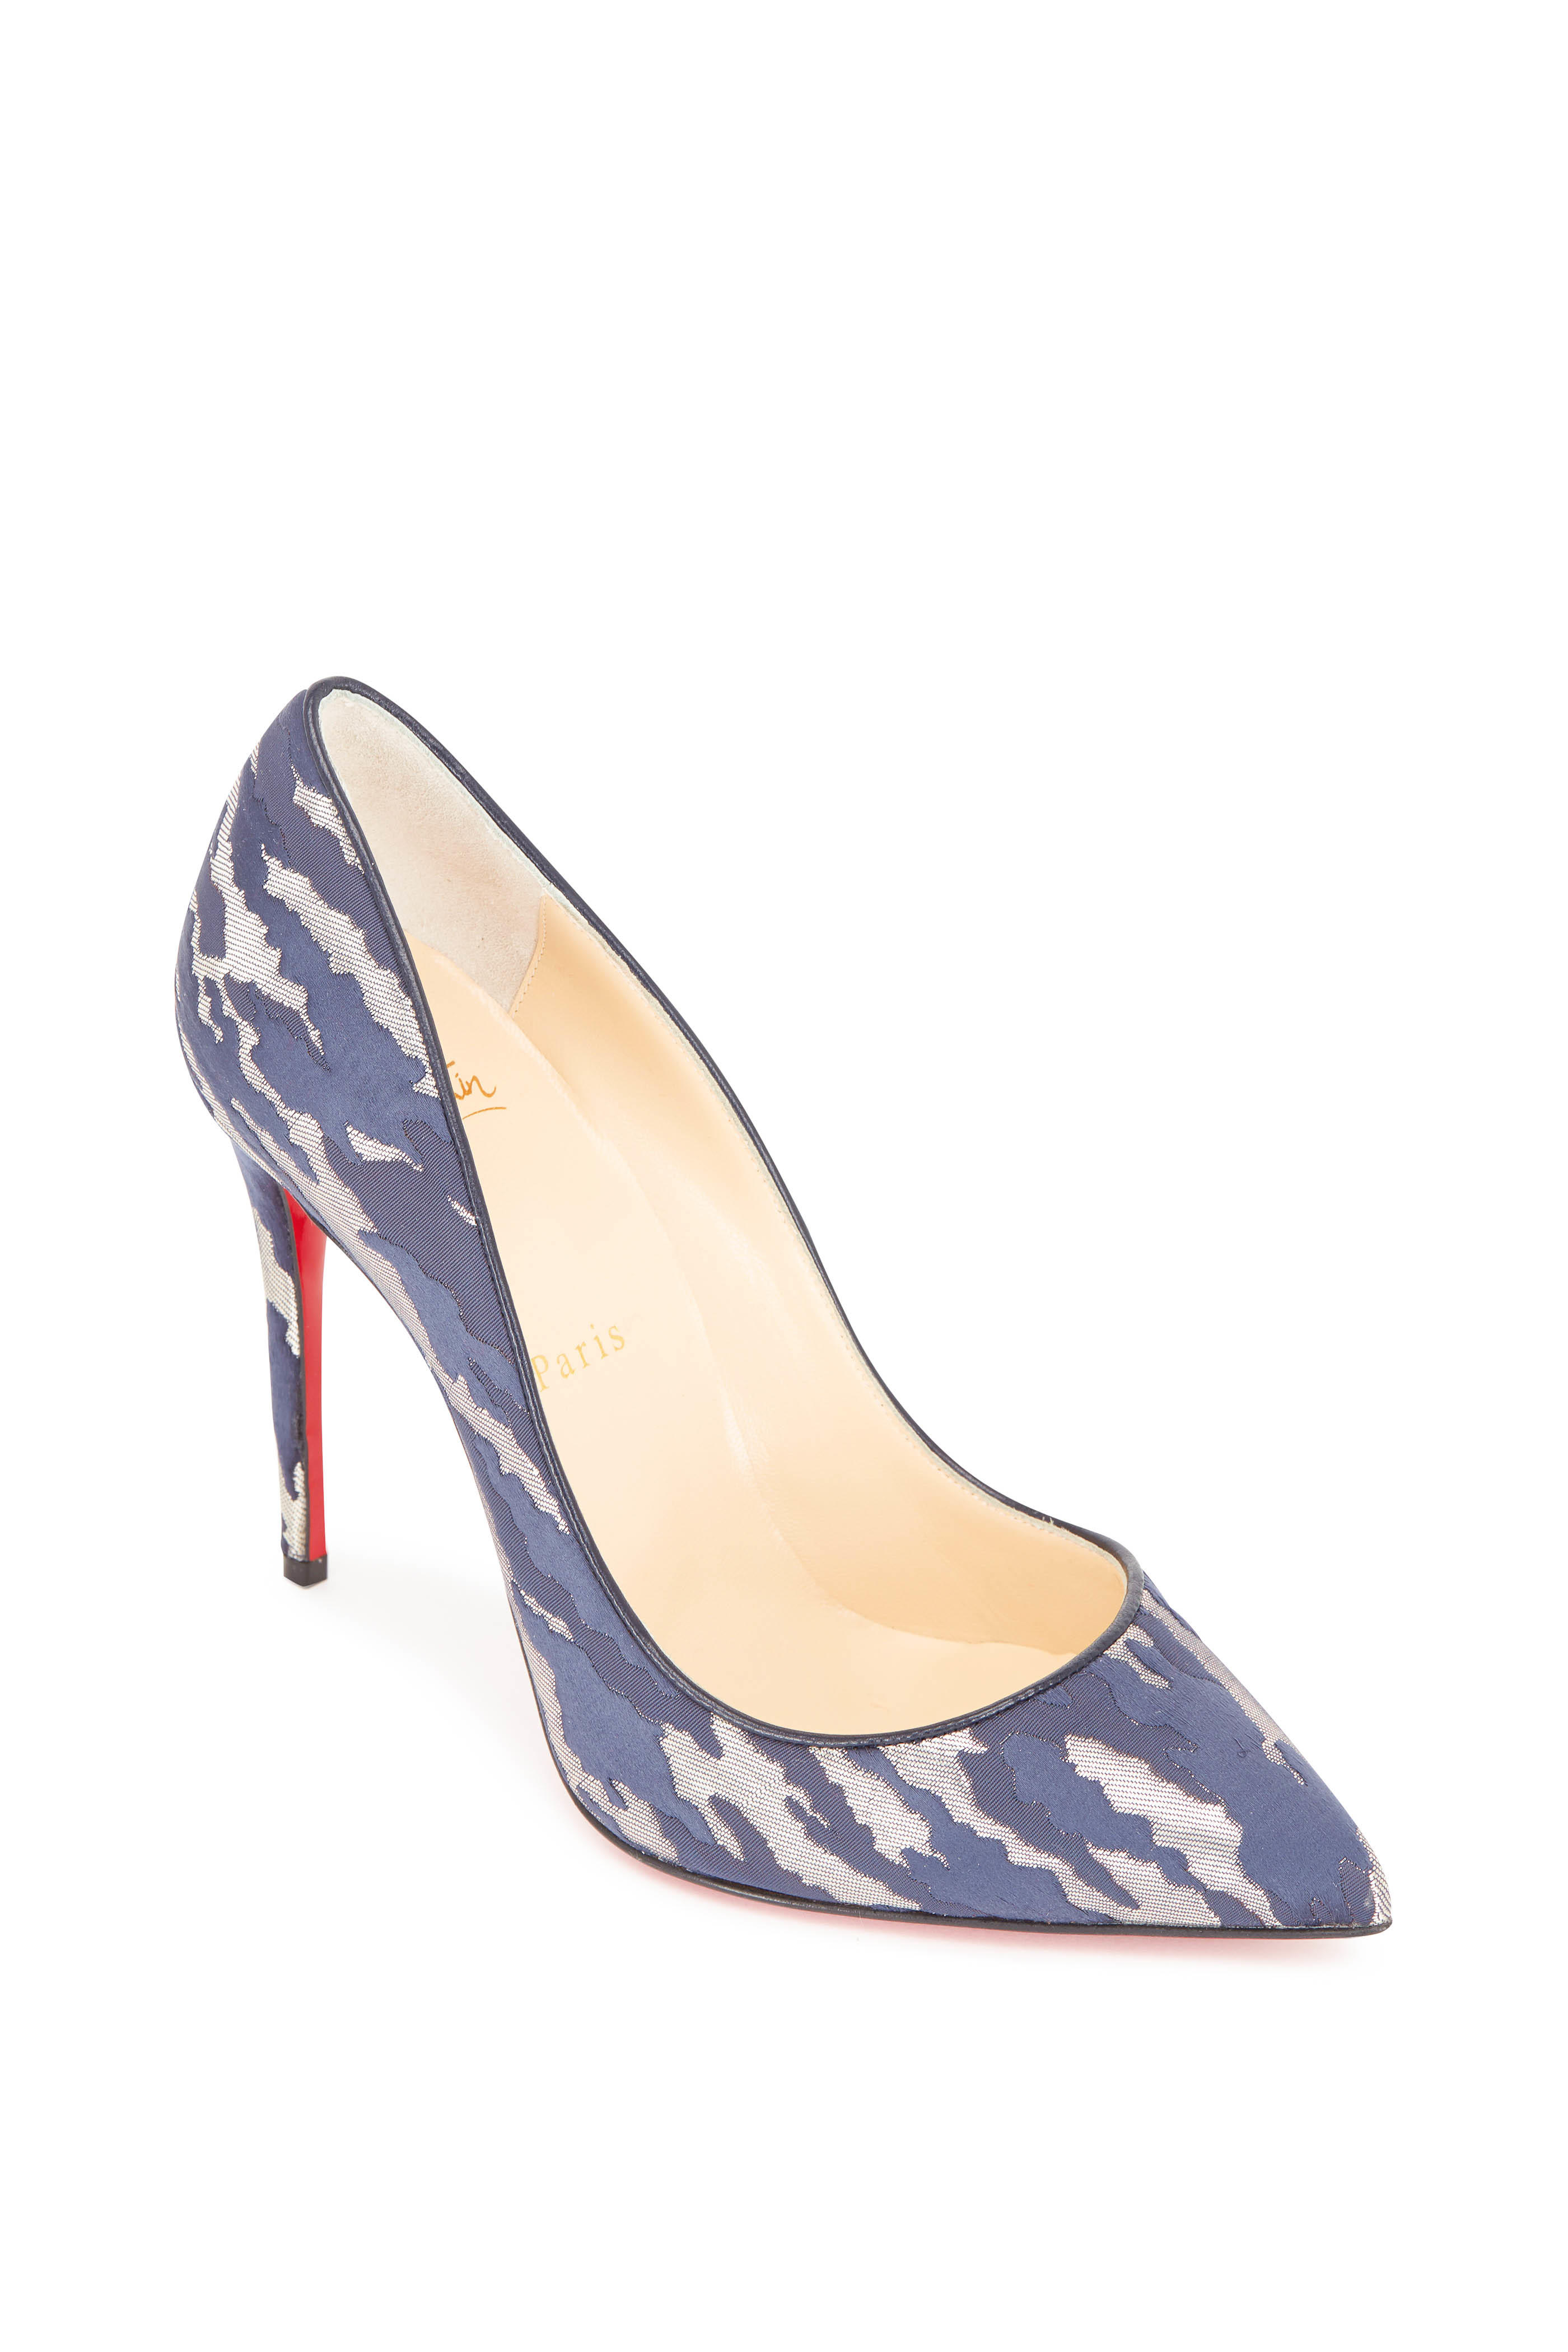 Louboutin - Follies Blue & Silver Camo 100mm | Mitchell Stores